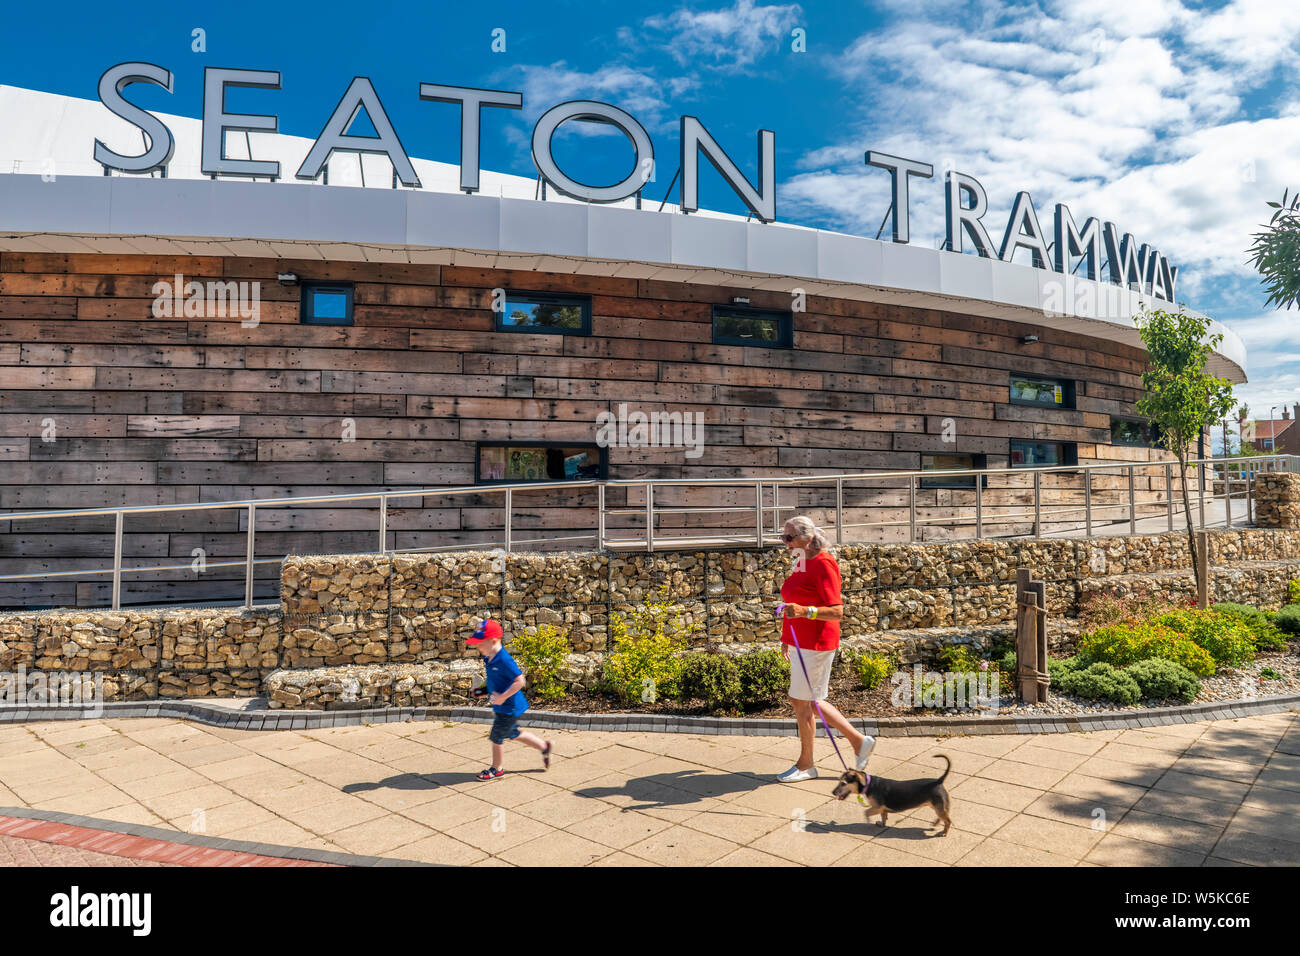 Situated in the South East Devon seaside town of Seaton, the new building for Seaton Tramway, opened in 2018, offers a small gift shop, a cafe and inf Stock Photo